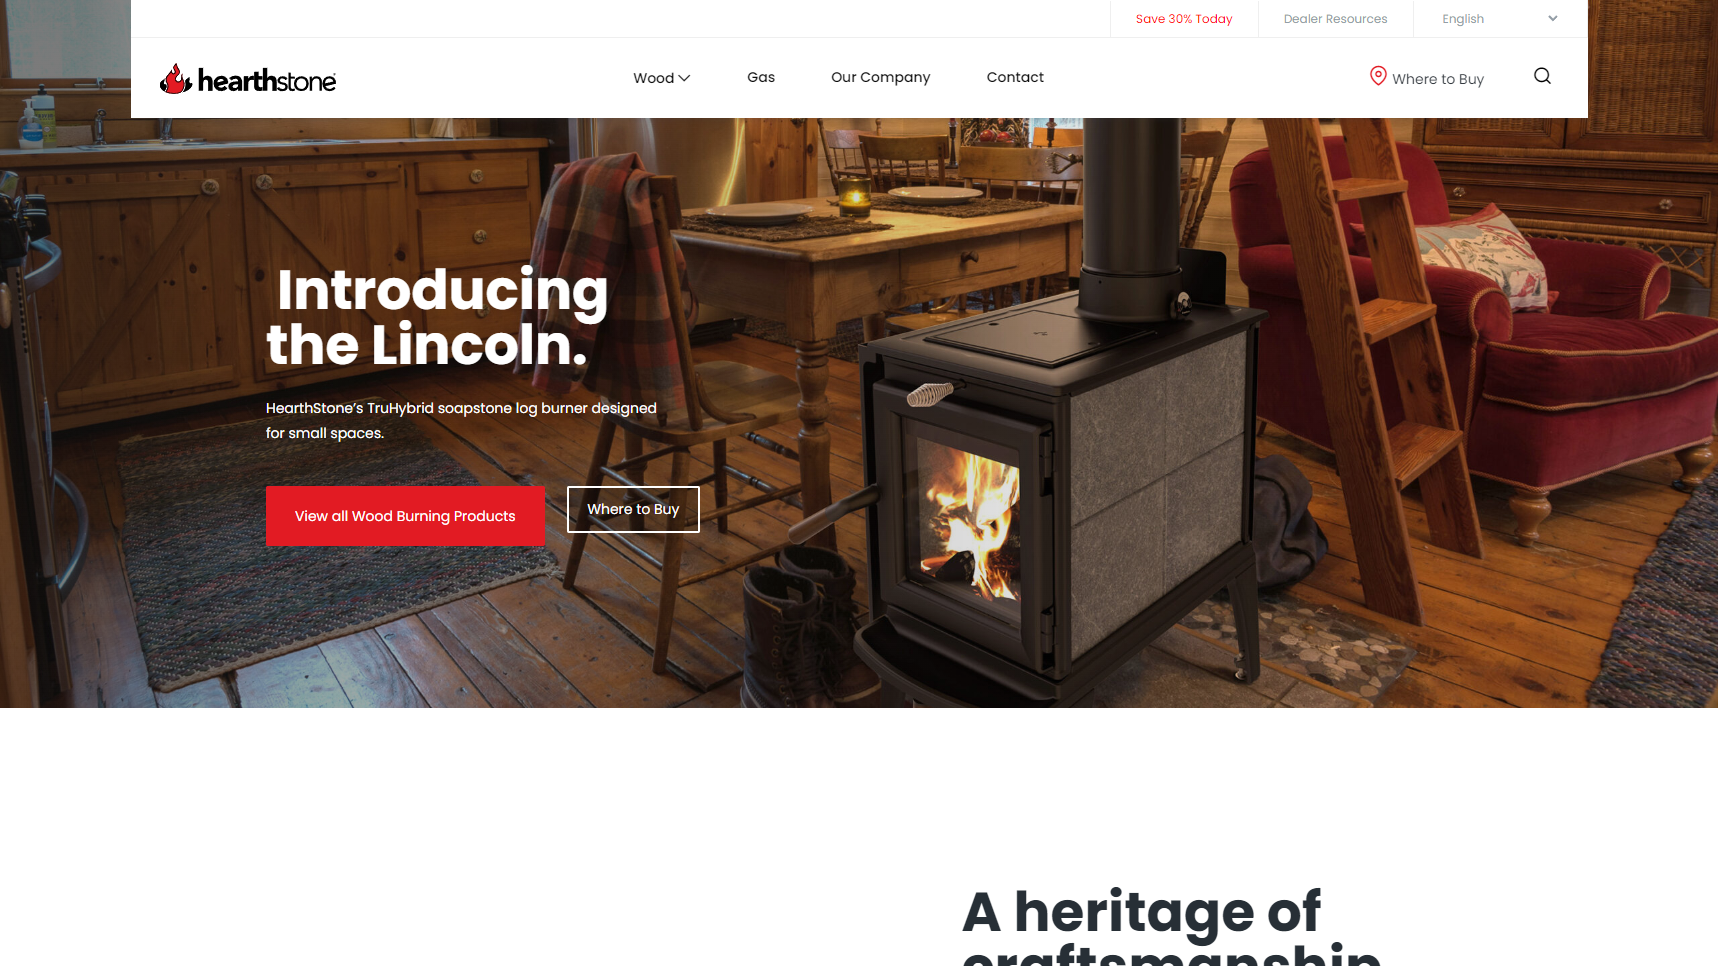 Hearthstone - Wood Stove Manufacturer